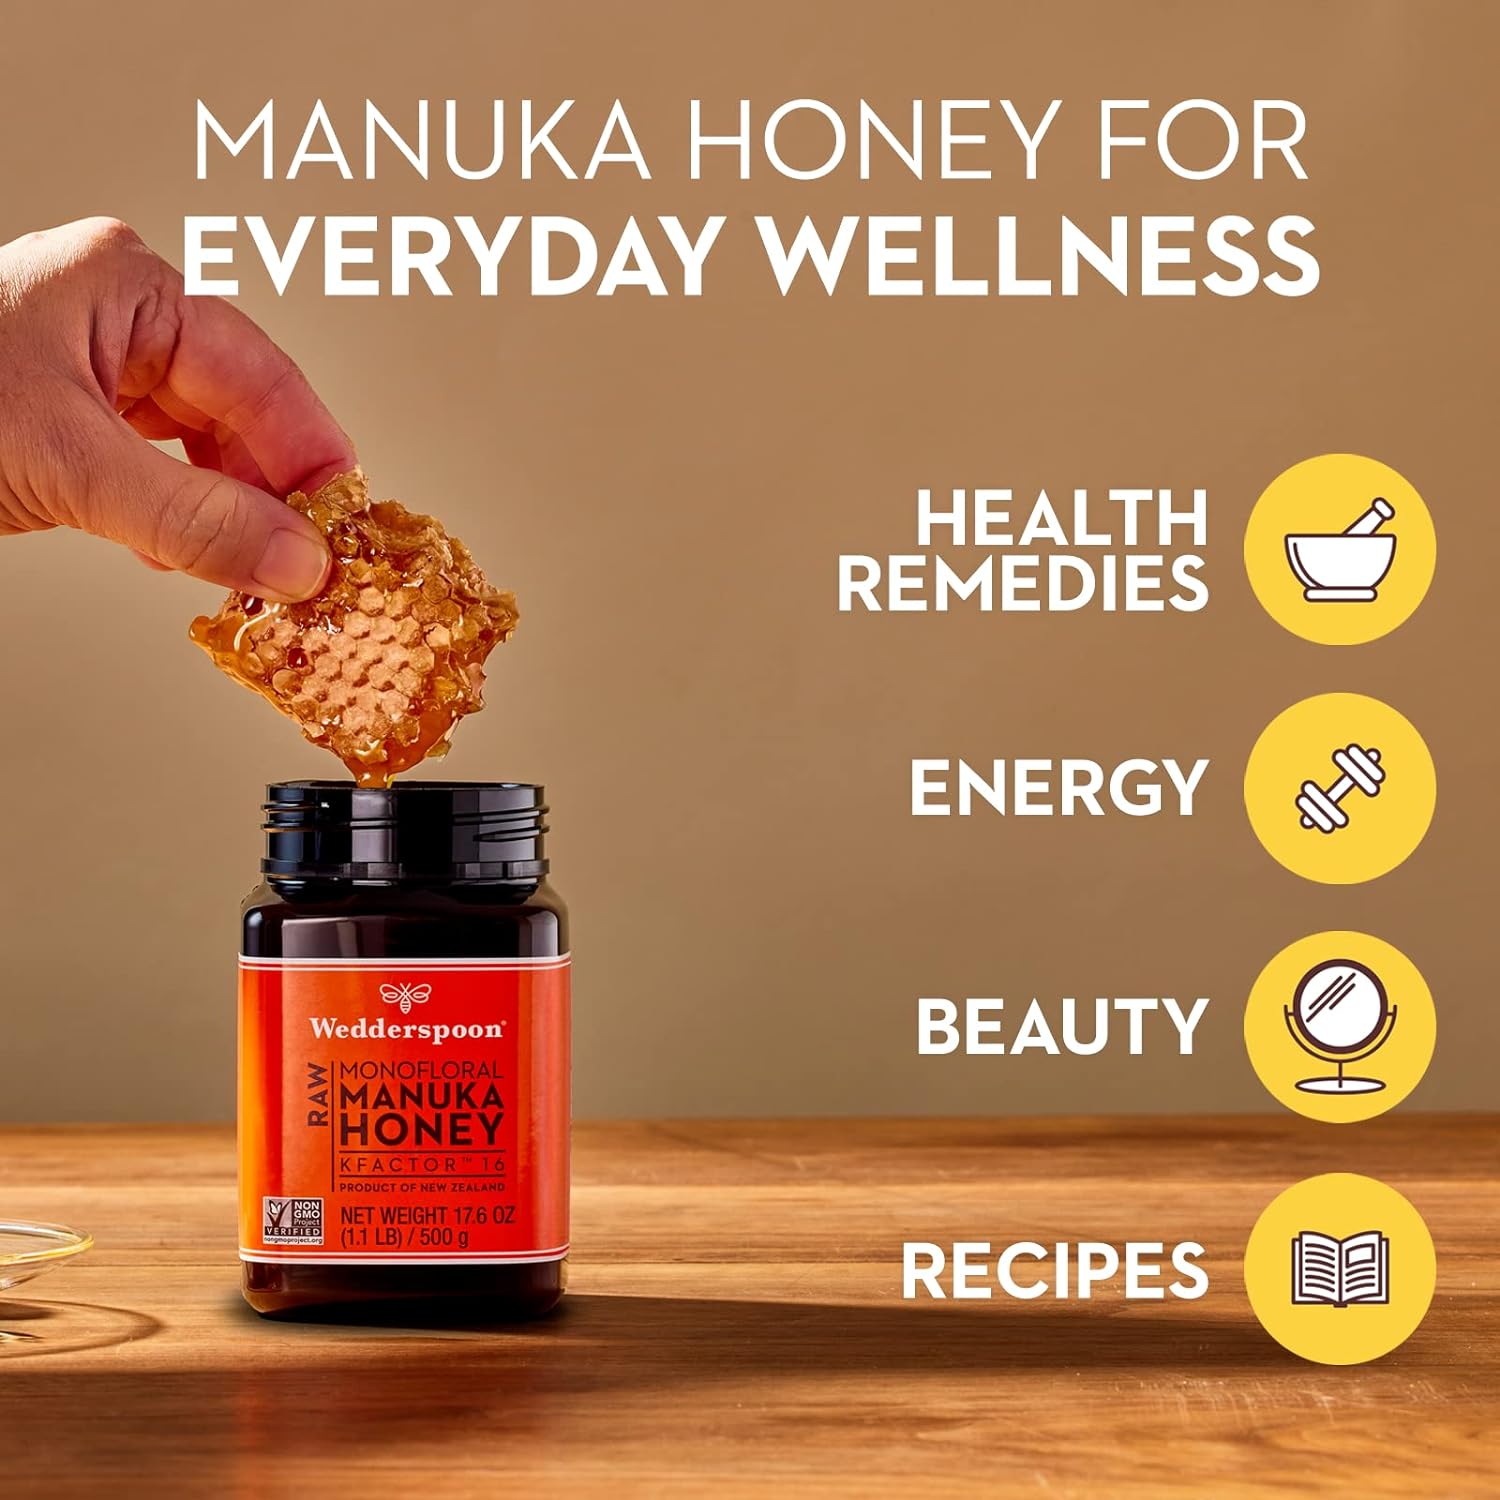 Wedderspoon Raw Premium Manuka Honey, KFactor 16, 35.2 Oz, Unpasteurized, Genuine New Zealand Honey, Traceable From Our Hives To Your Home : Grocery & Gourmet Food